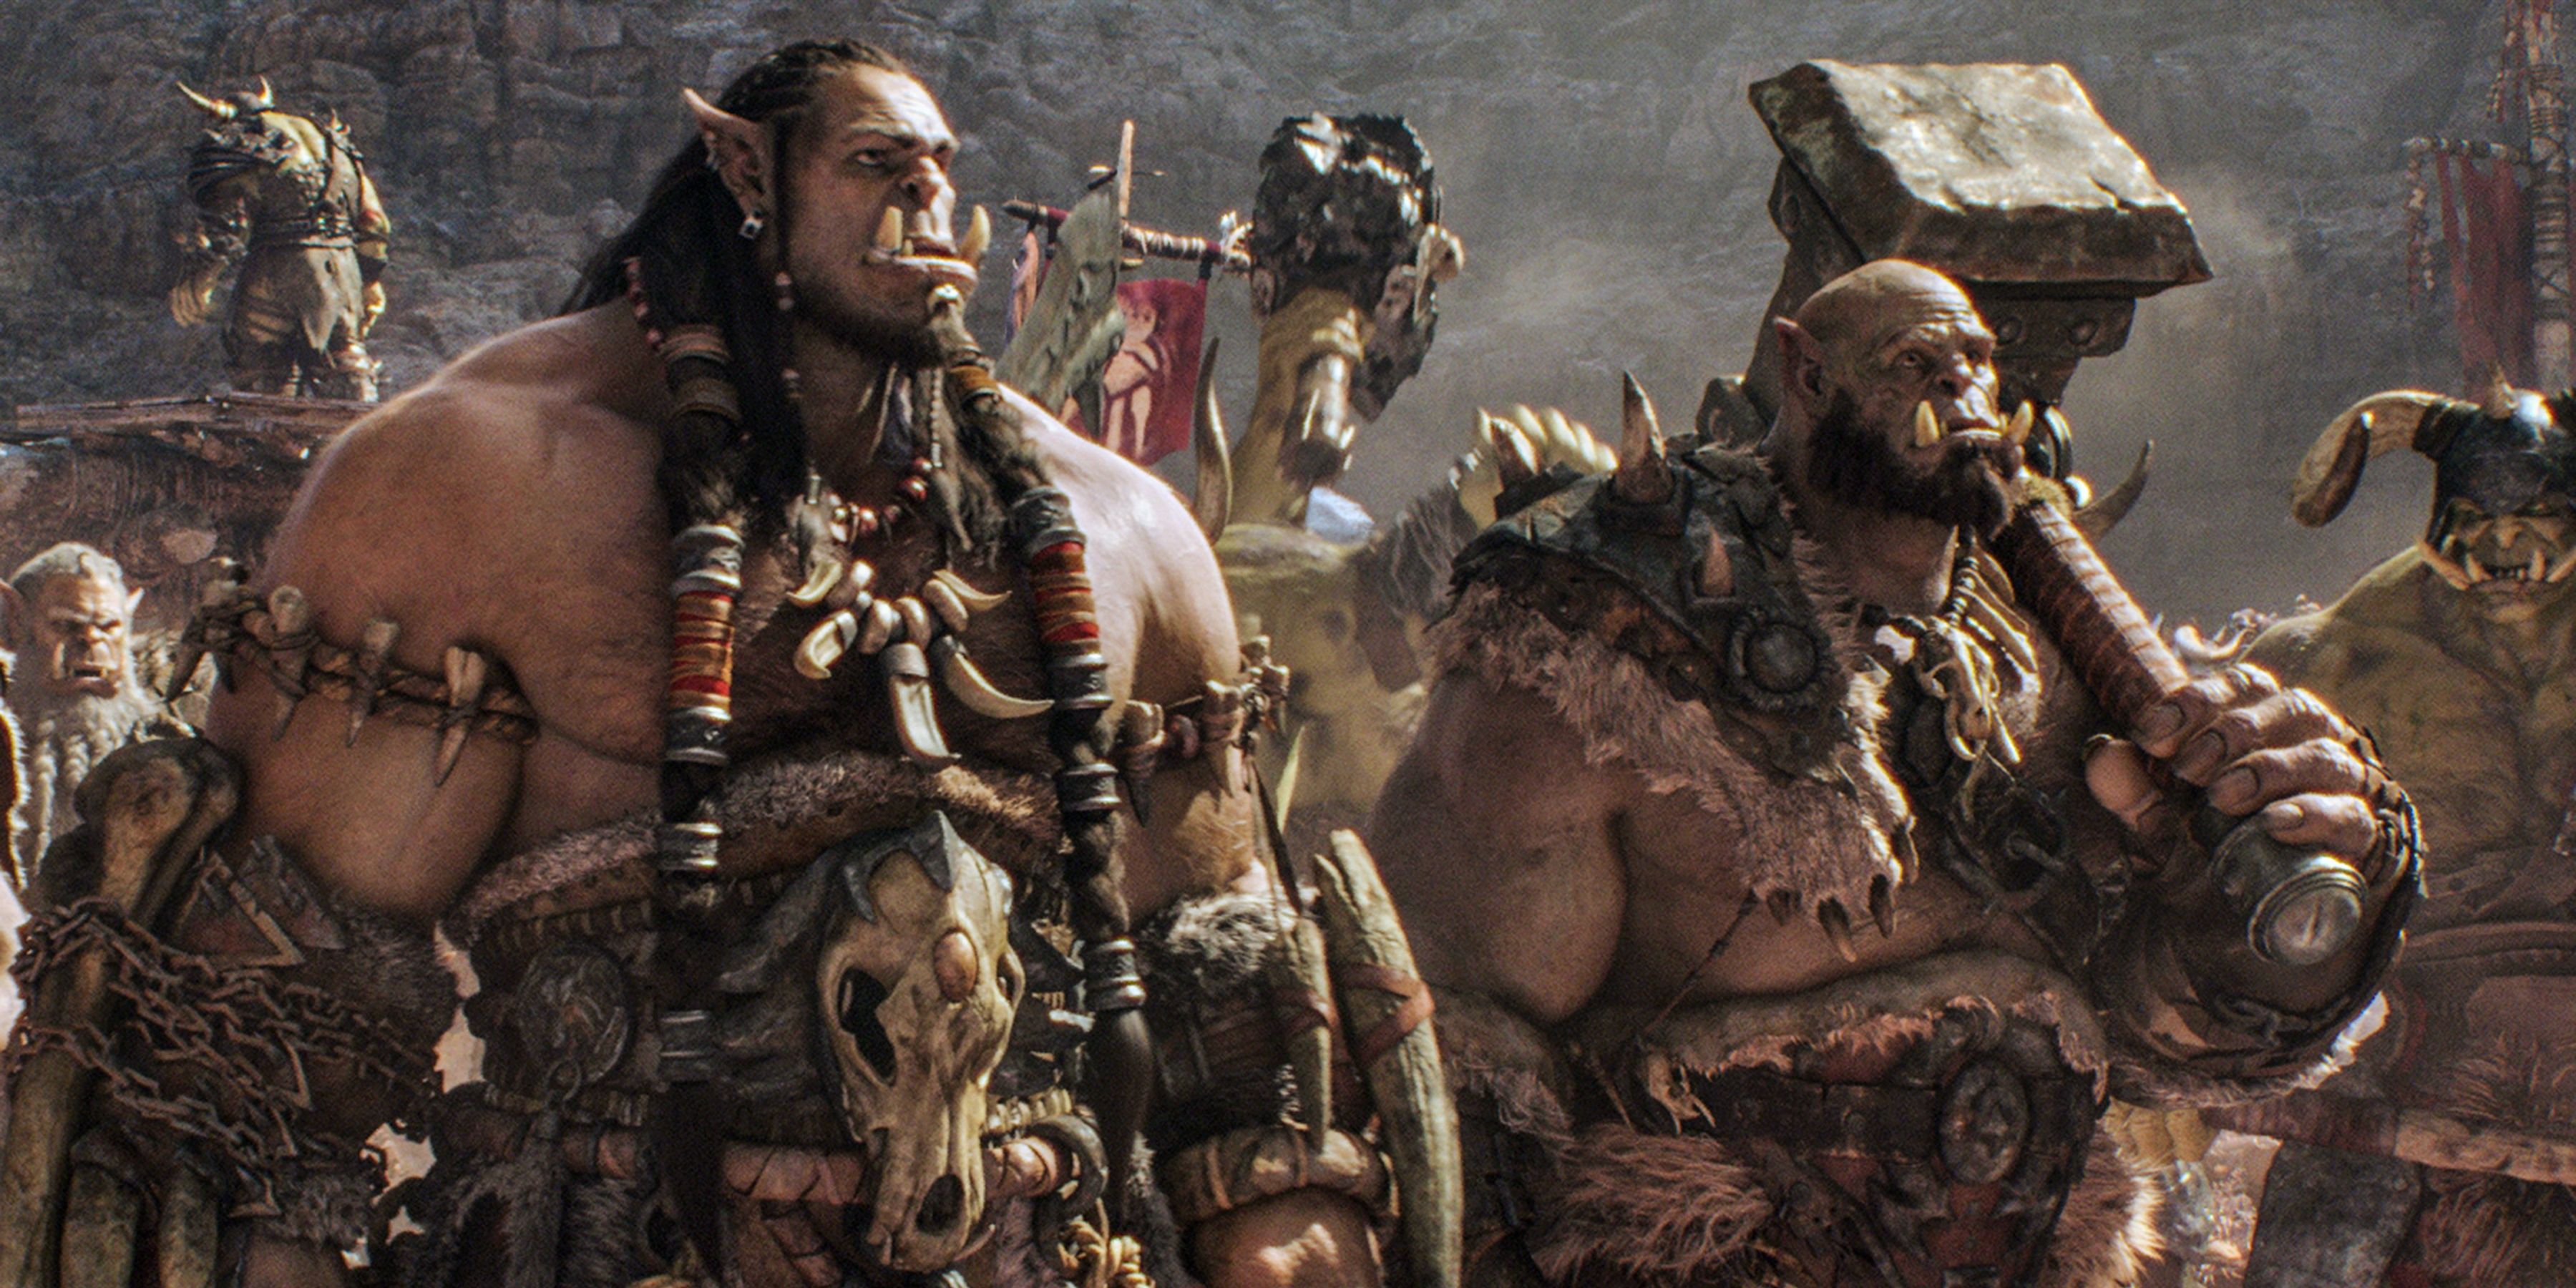 A scene from Warcraft, a 2016 film co-produced by Blizzard Entertainment and based on one of its original IPs. The film grossed $433 million in the global box office. 